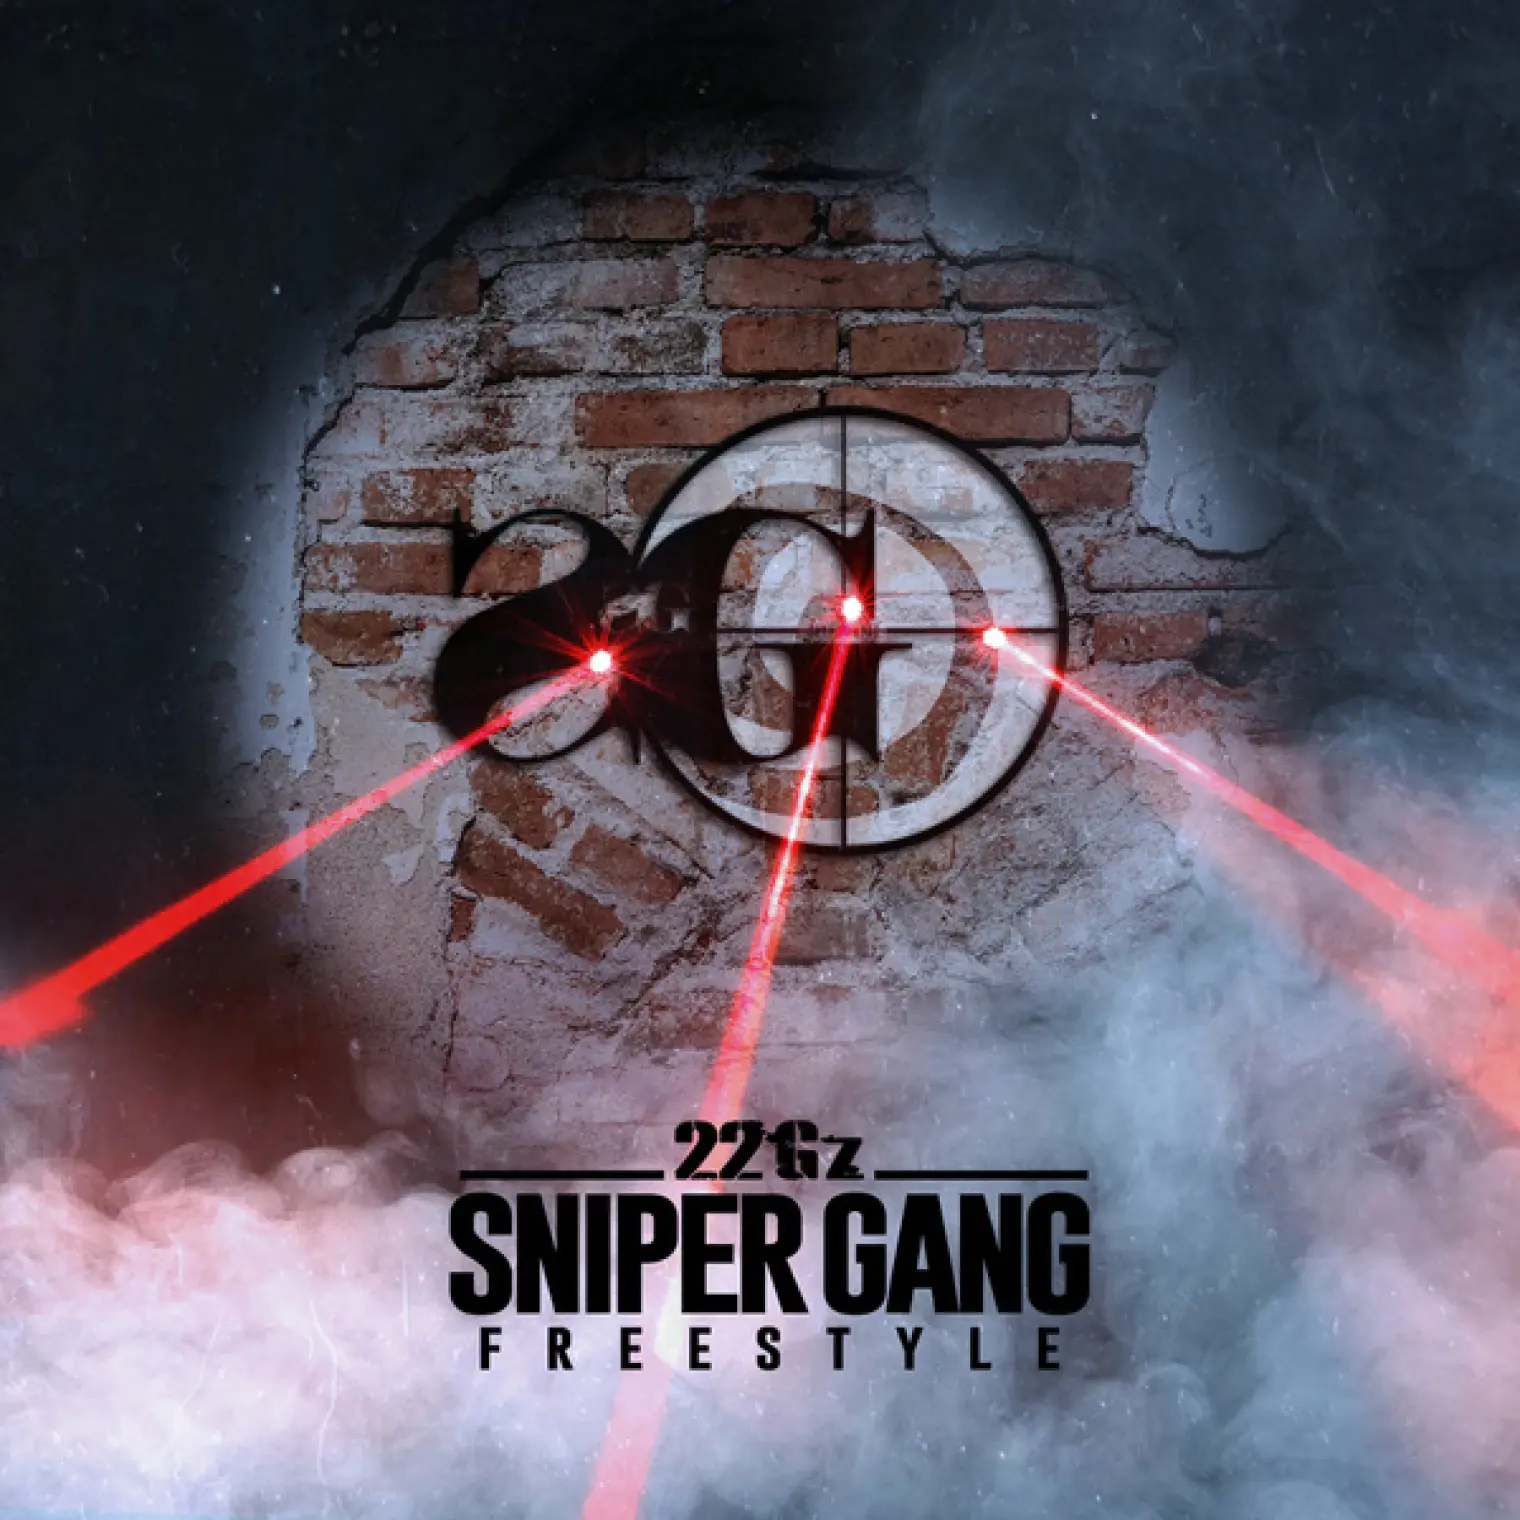 Sniper Gang Freestyle -  22Gz 